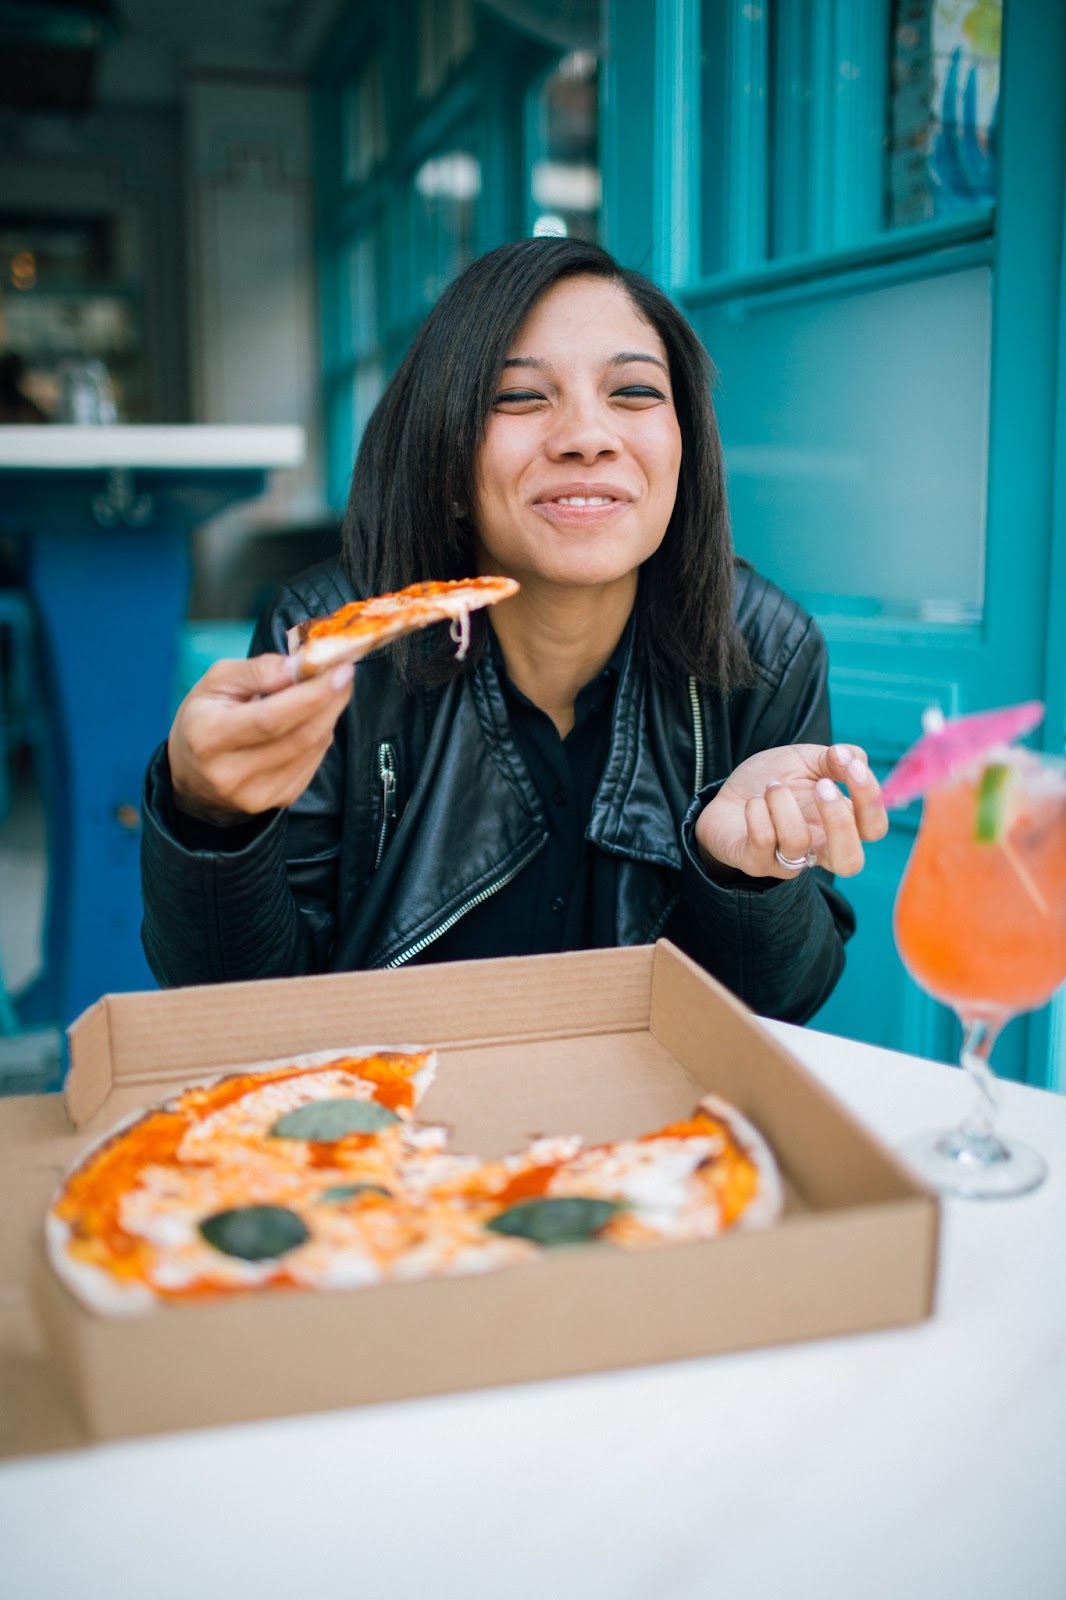 A woman smiles after taking a bite of a piece of pizza topped with cheese and basil leaves.